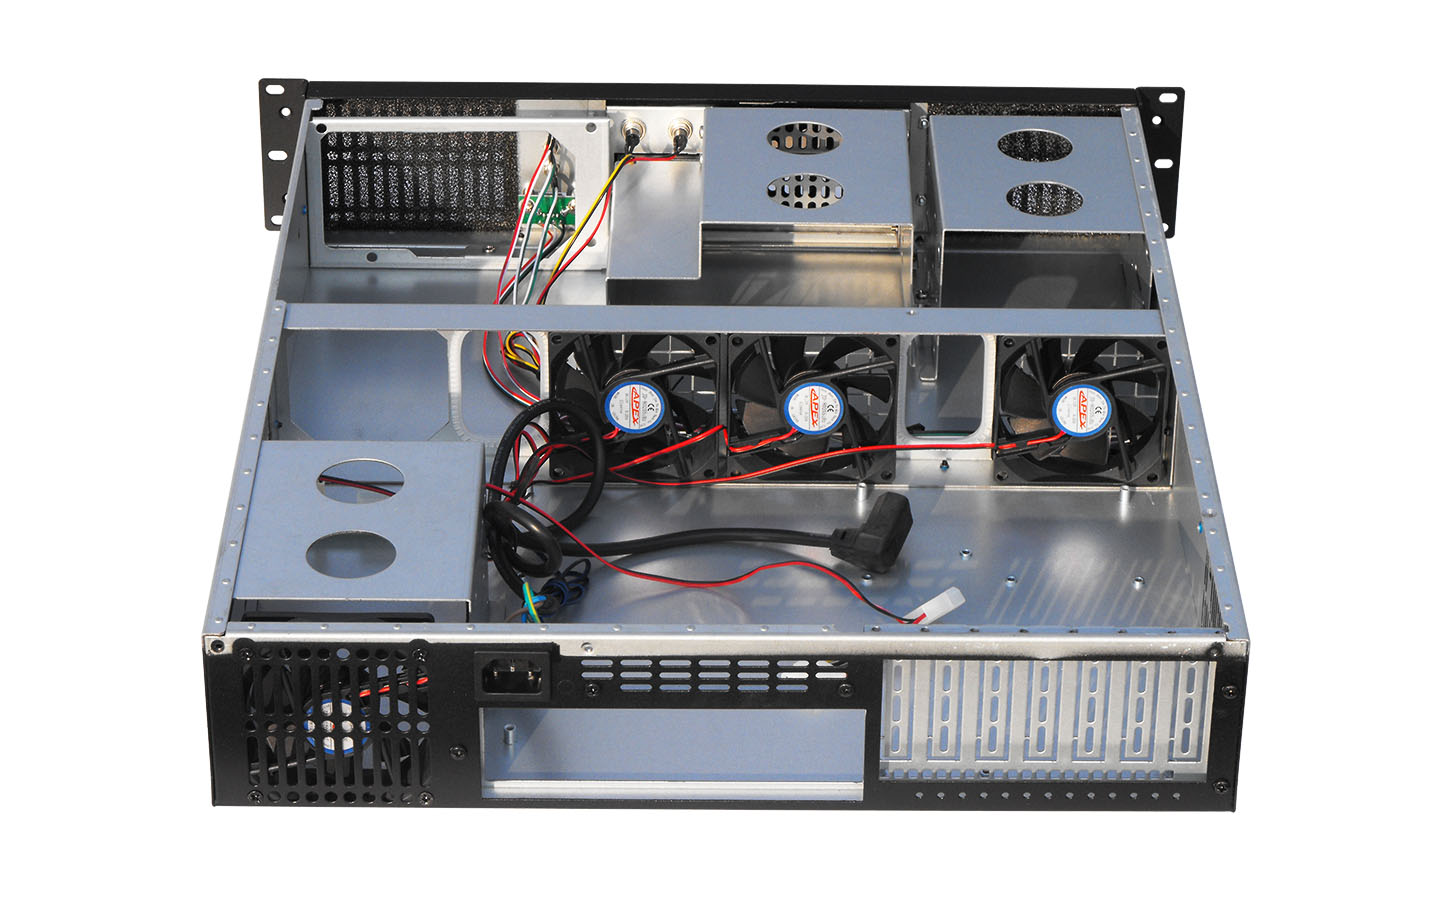 2U server case Support motherboard size up to 12105and 635HDD bays135HDD1525CDROM